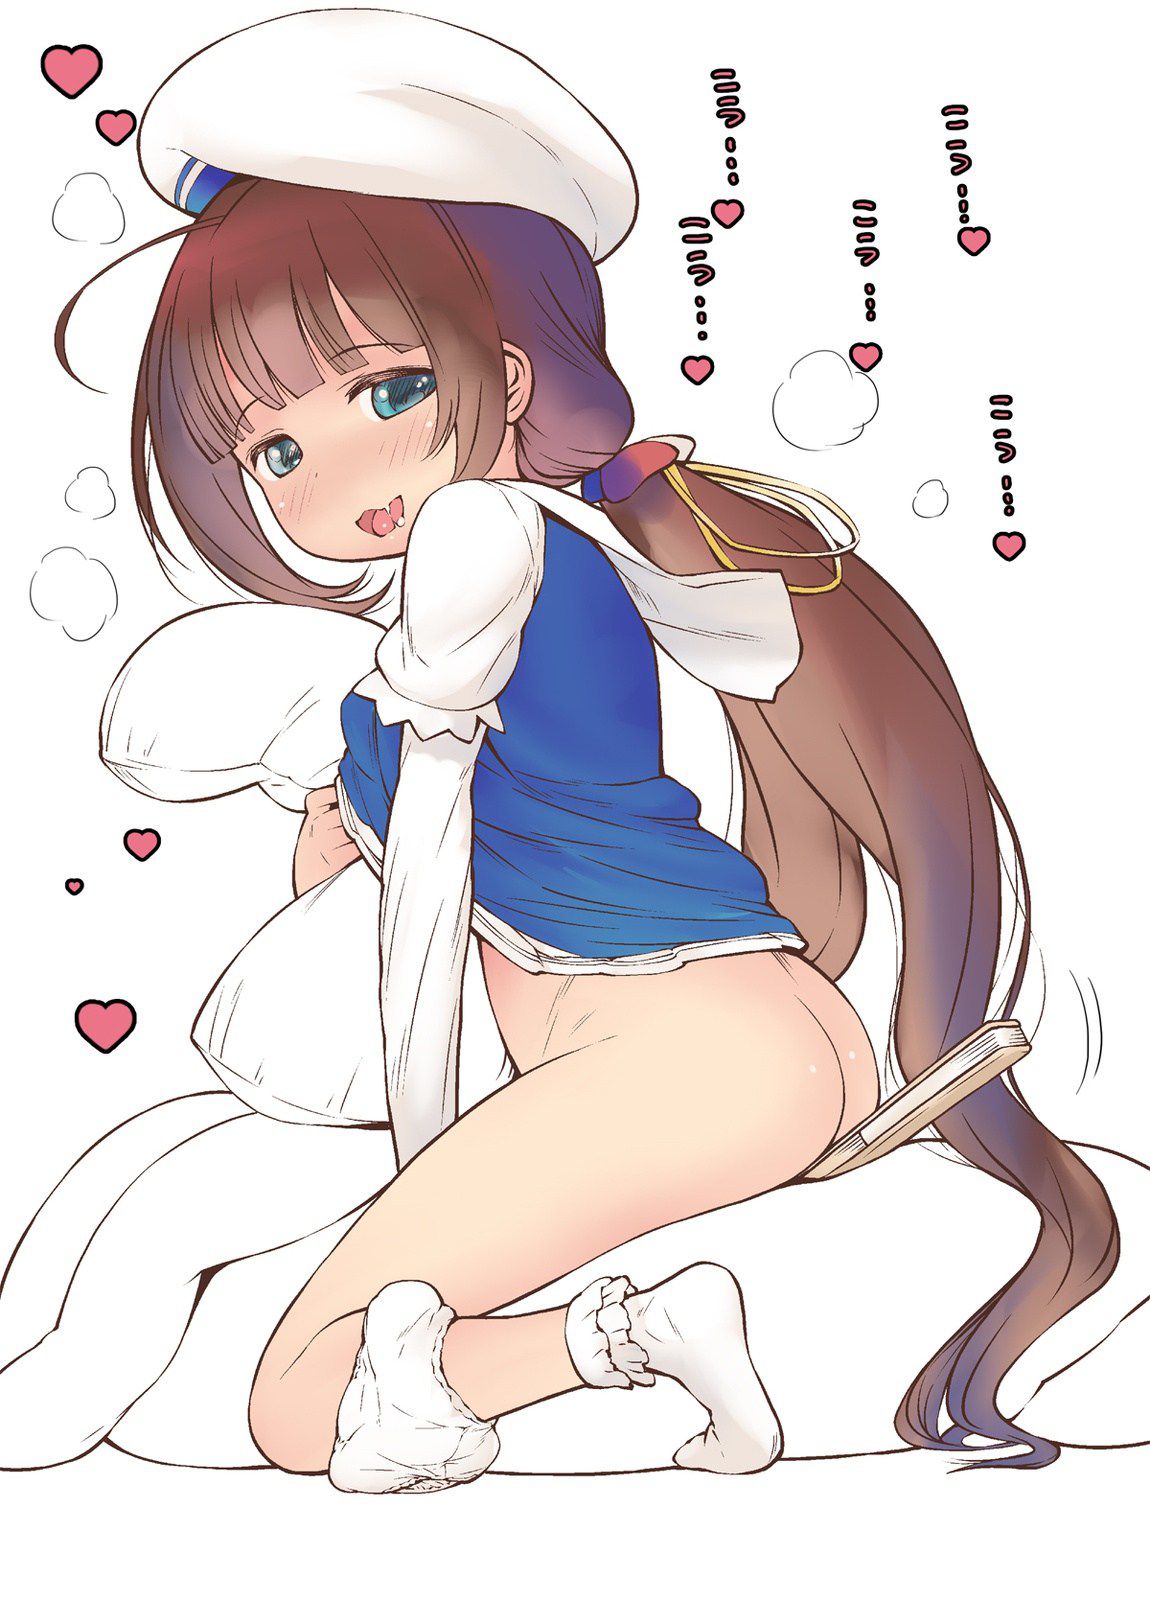 Two-dimensional erotic image of masturbation Loli girl who feels too comfortable and does not stop 16